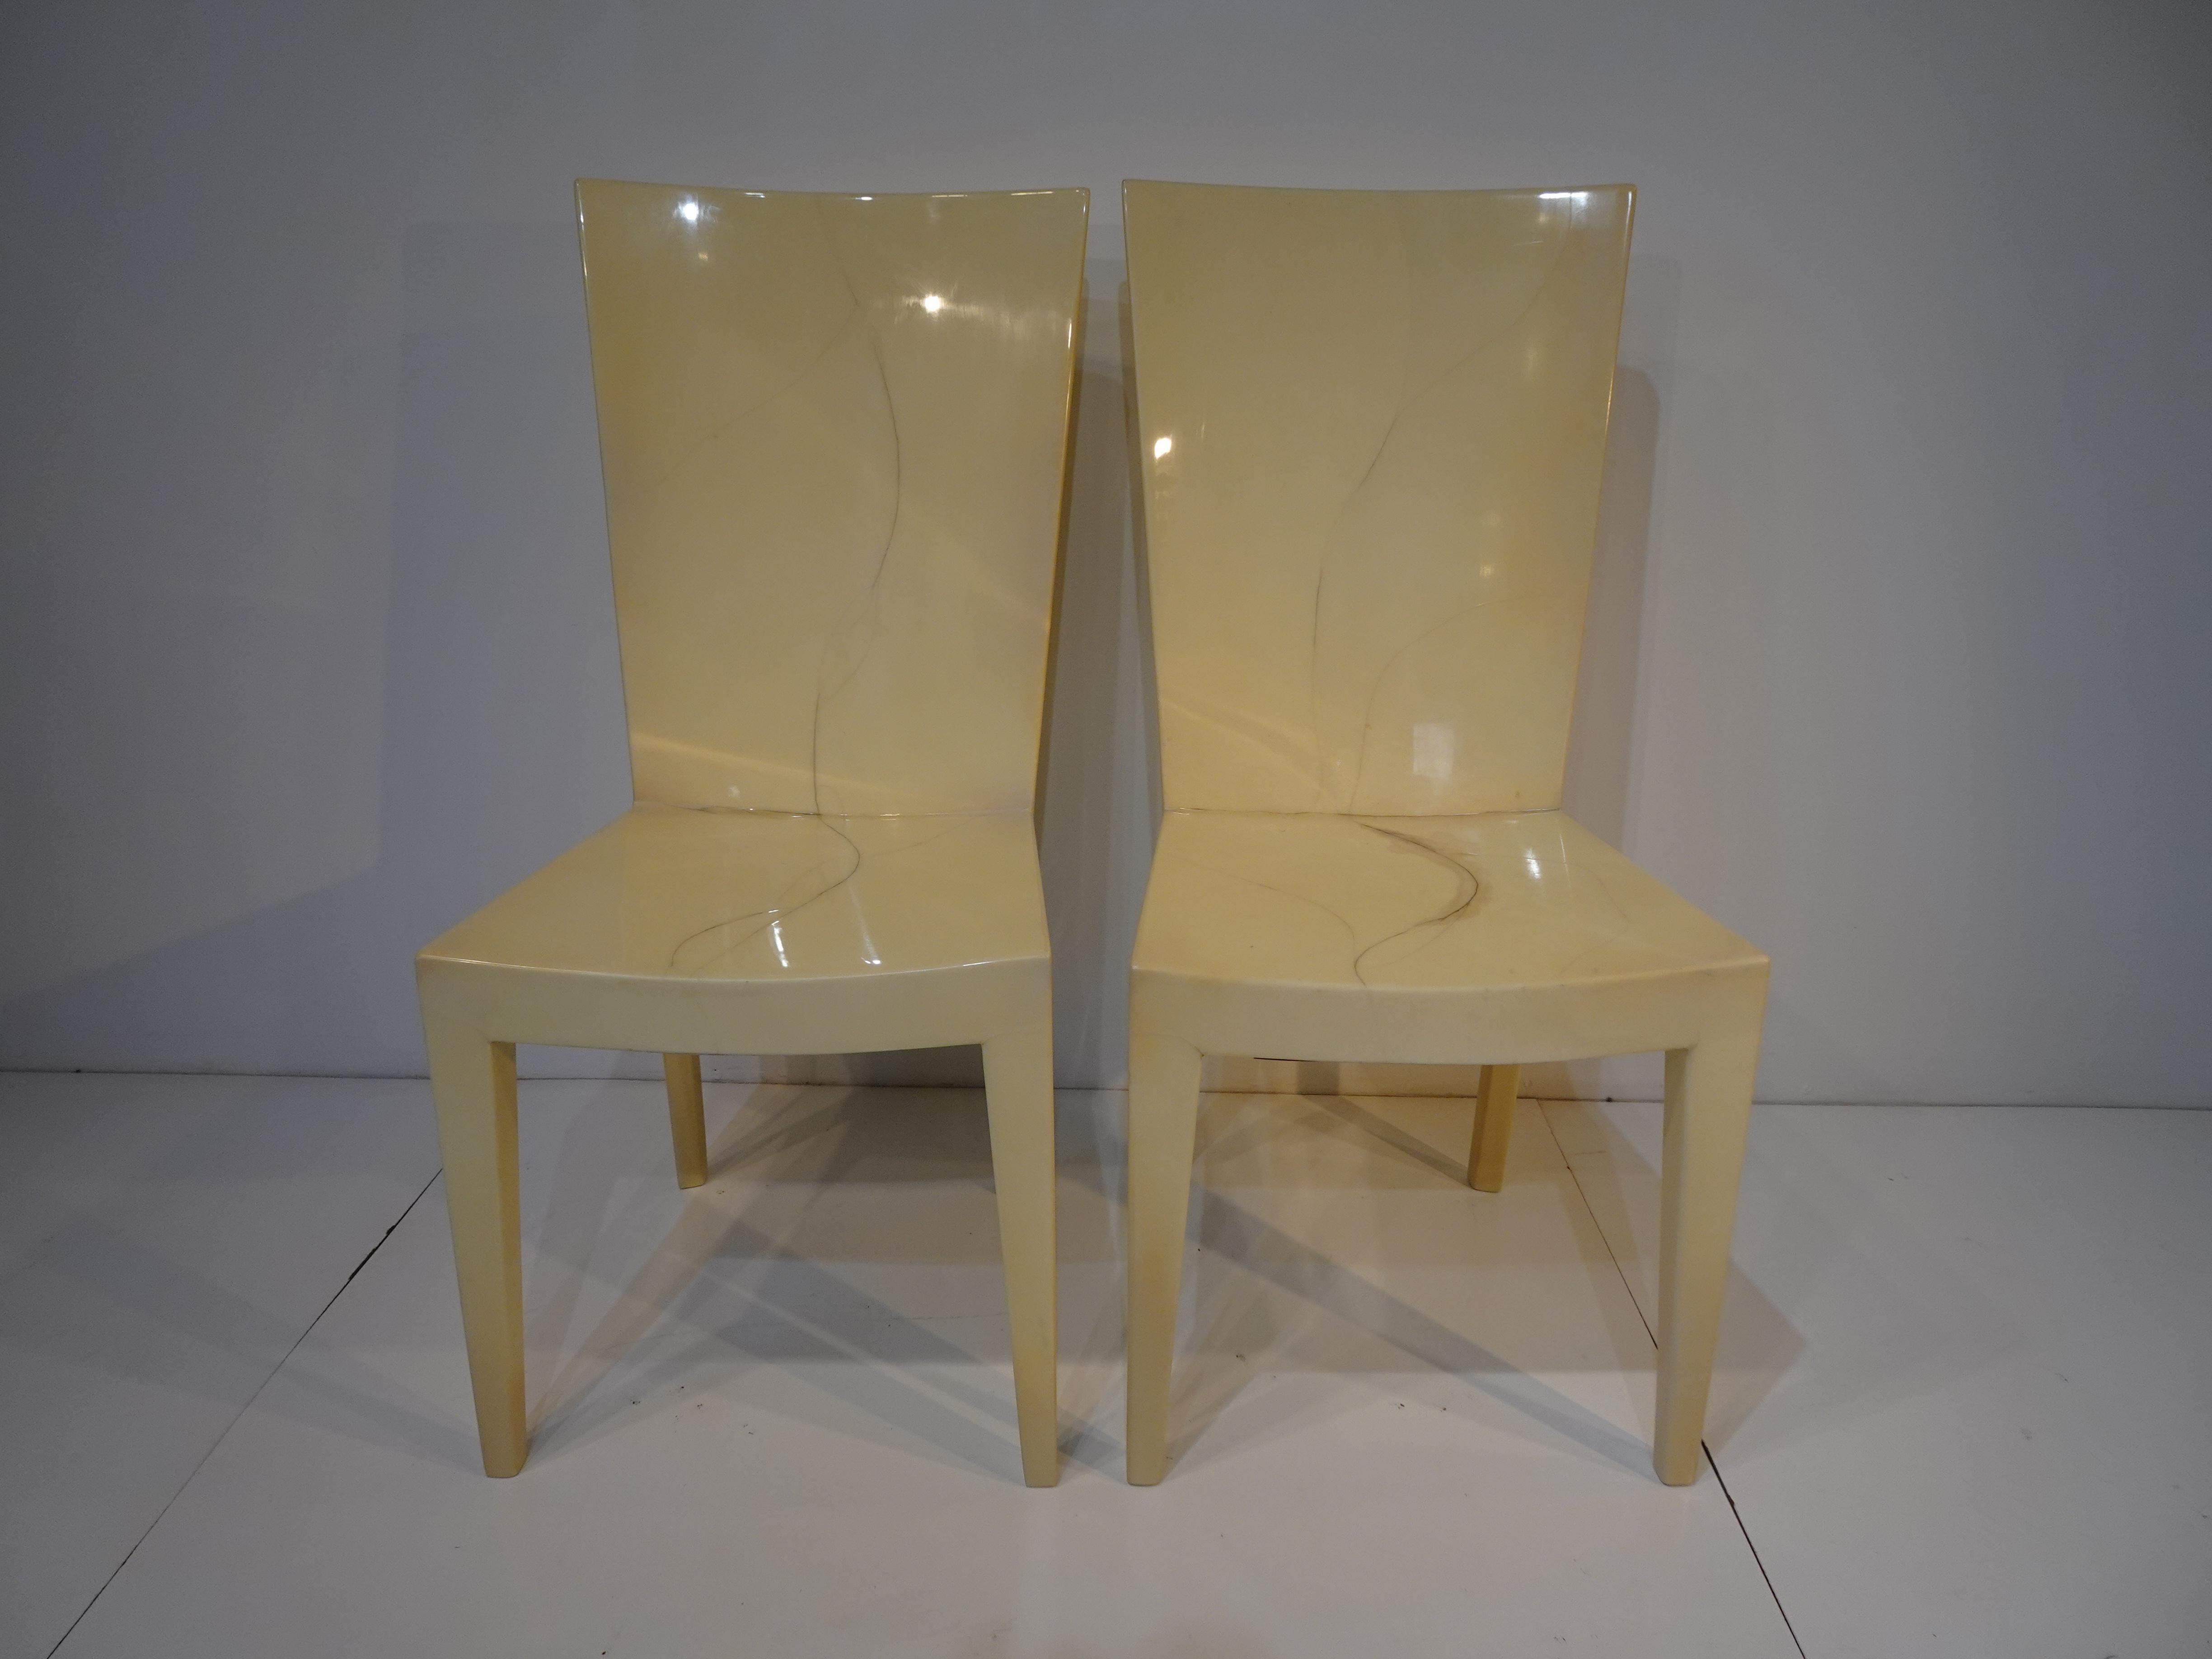 A pair of tall back goatskin covered chairs with a high toned lacquered finish having a simple sophisticated elegant look . Produced in the 1970's this chair has stood the design test of time and can be used as head chairs in a dining set or as side